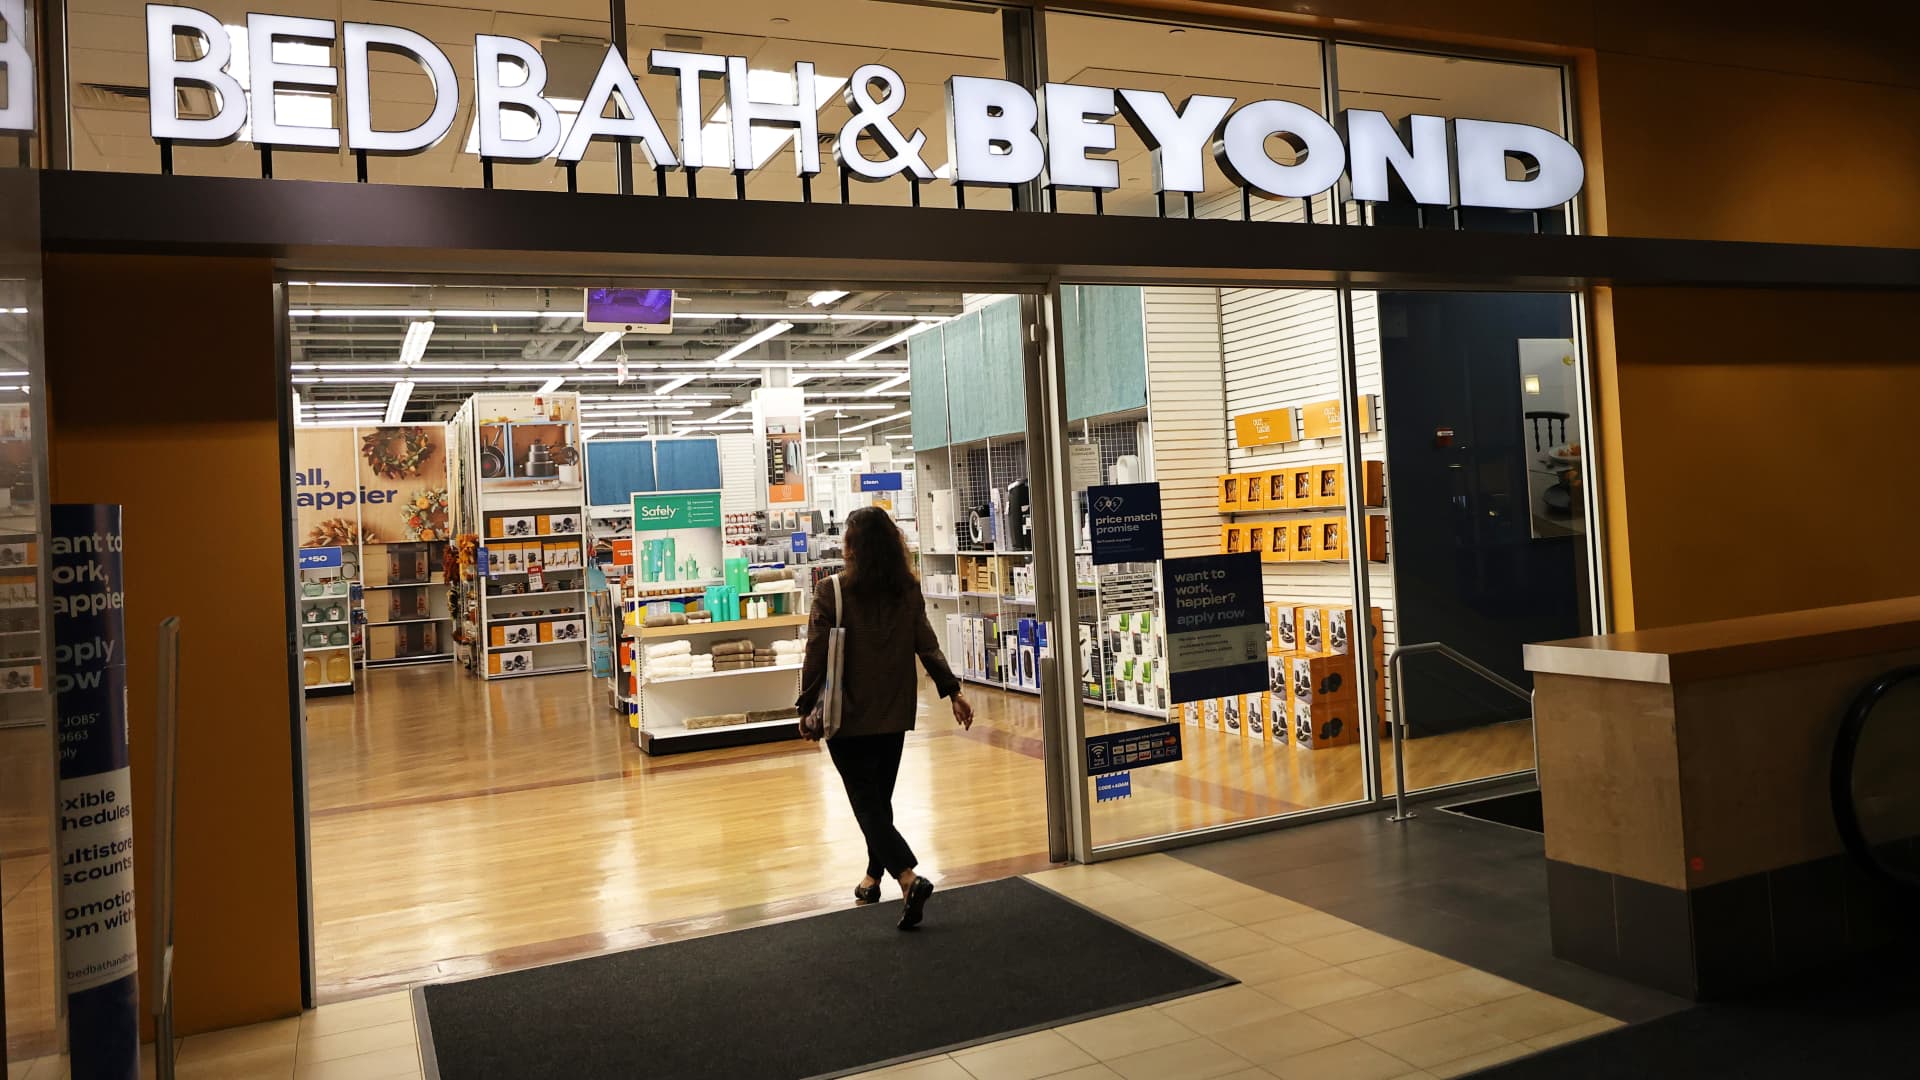 A person enters a Bed Bath & Beyond store on October 01, 2021 in the Tribeca neighborhood in New York City.